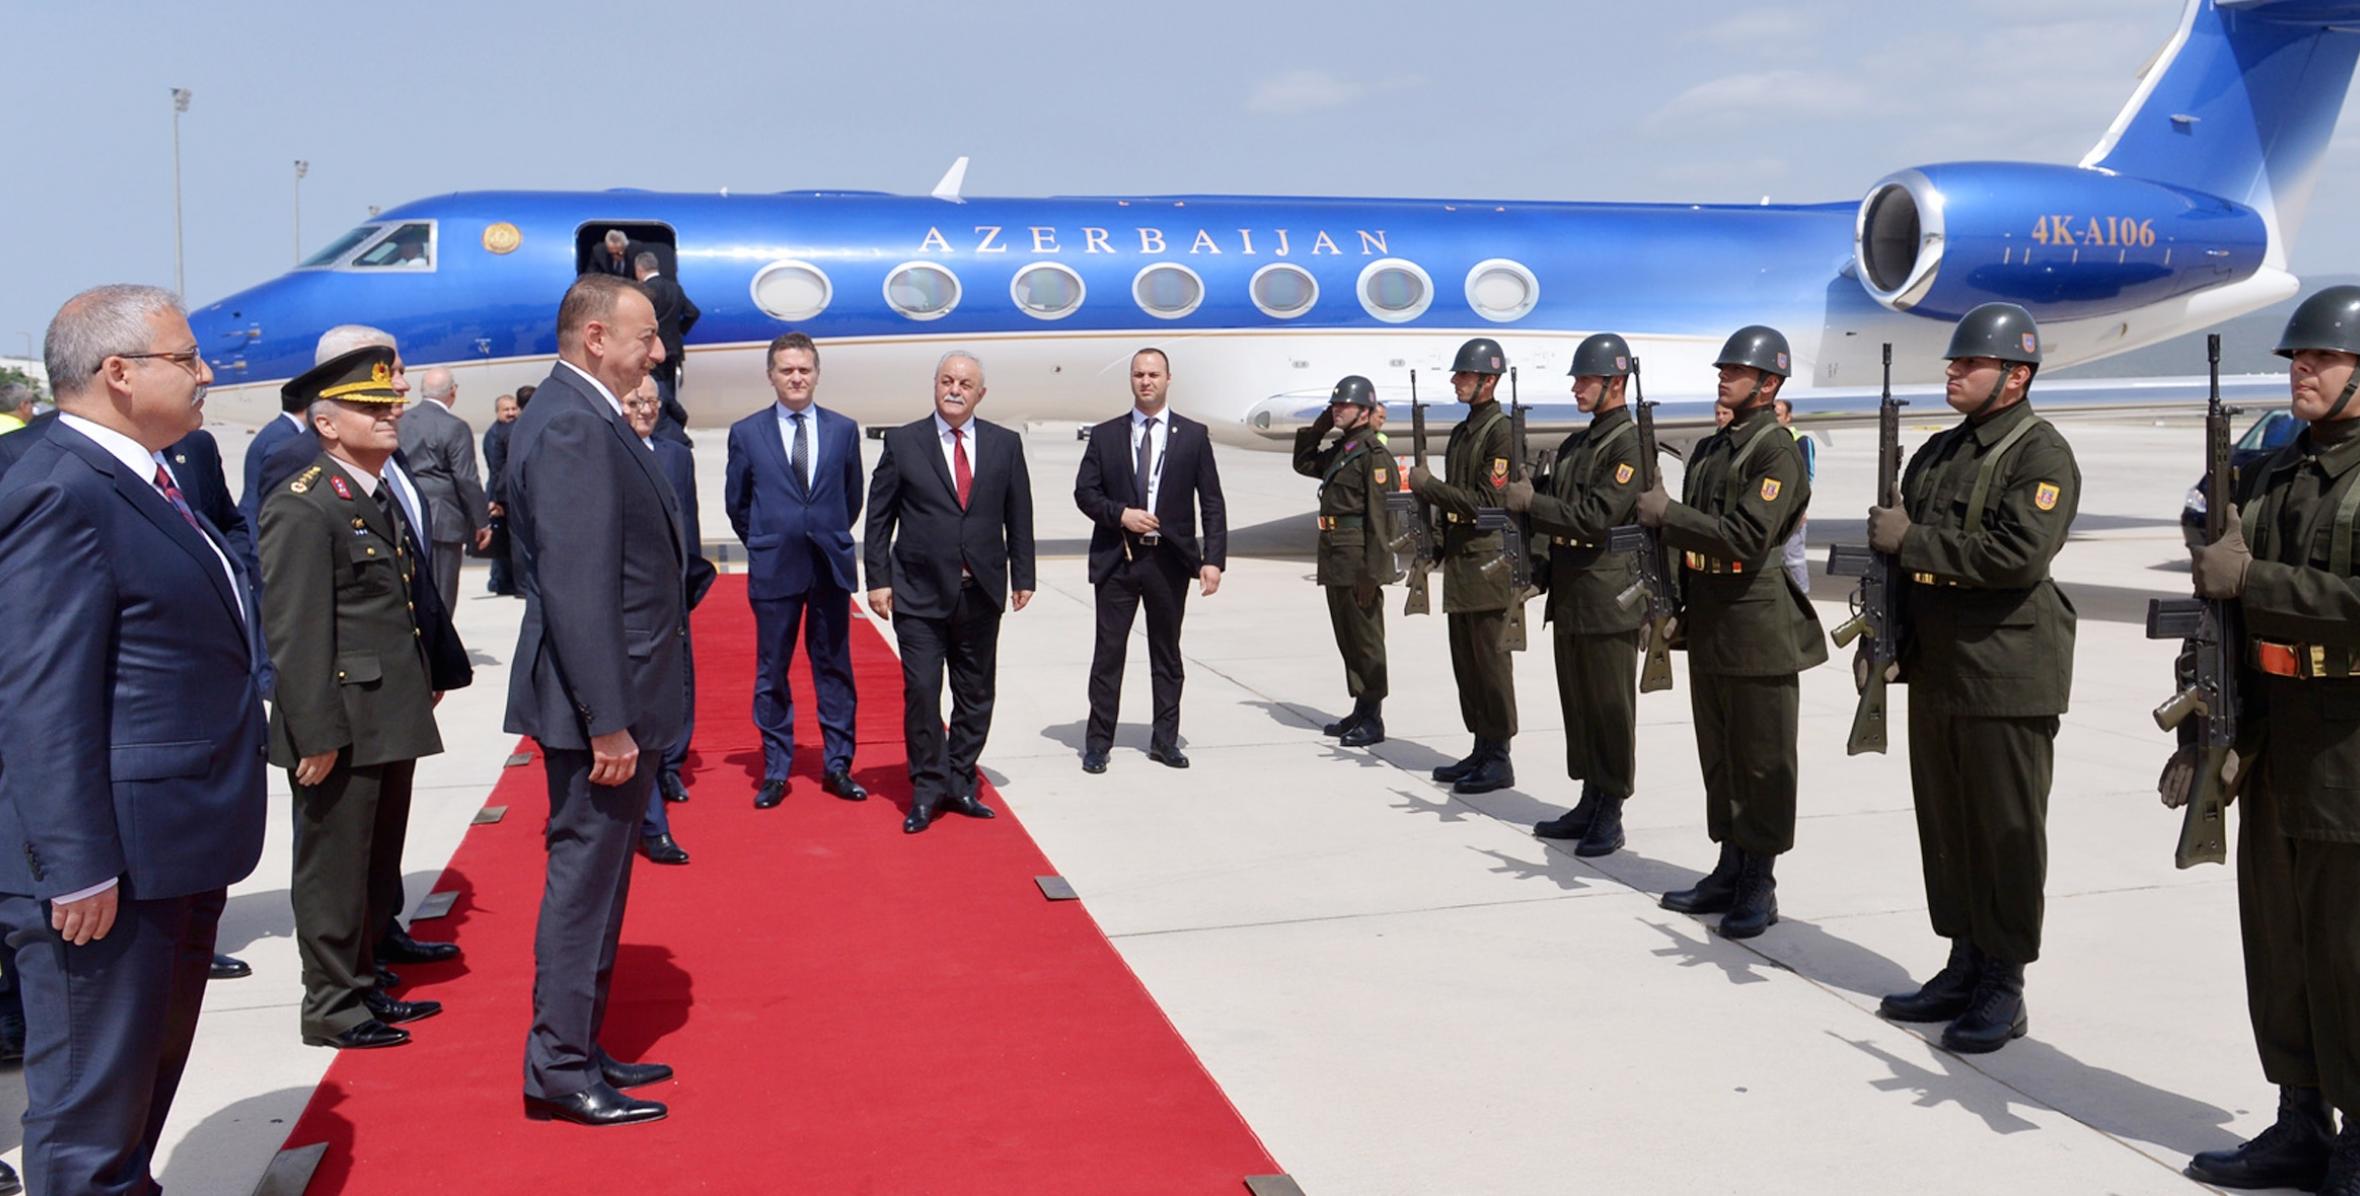 Ilham Aliyev arrived in the Republic of Turkey on a working visit